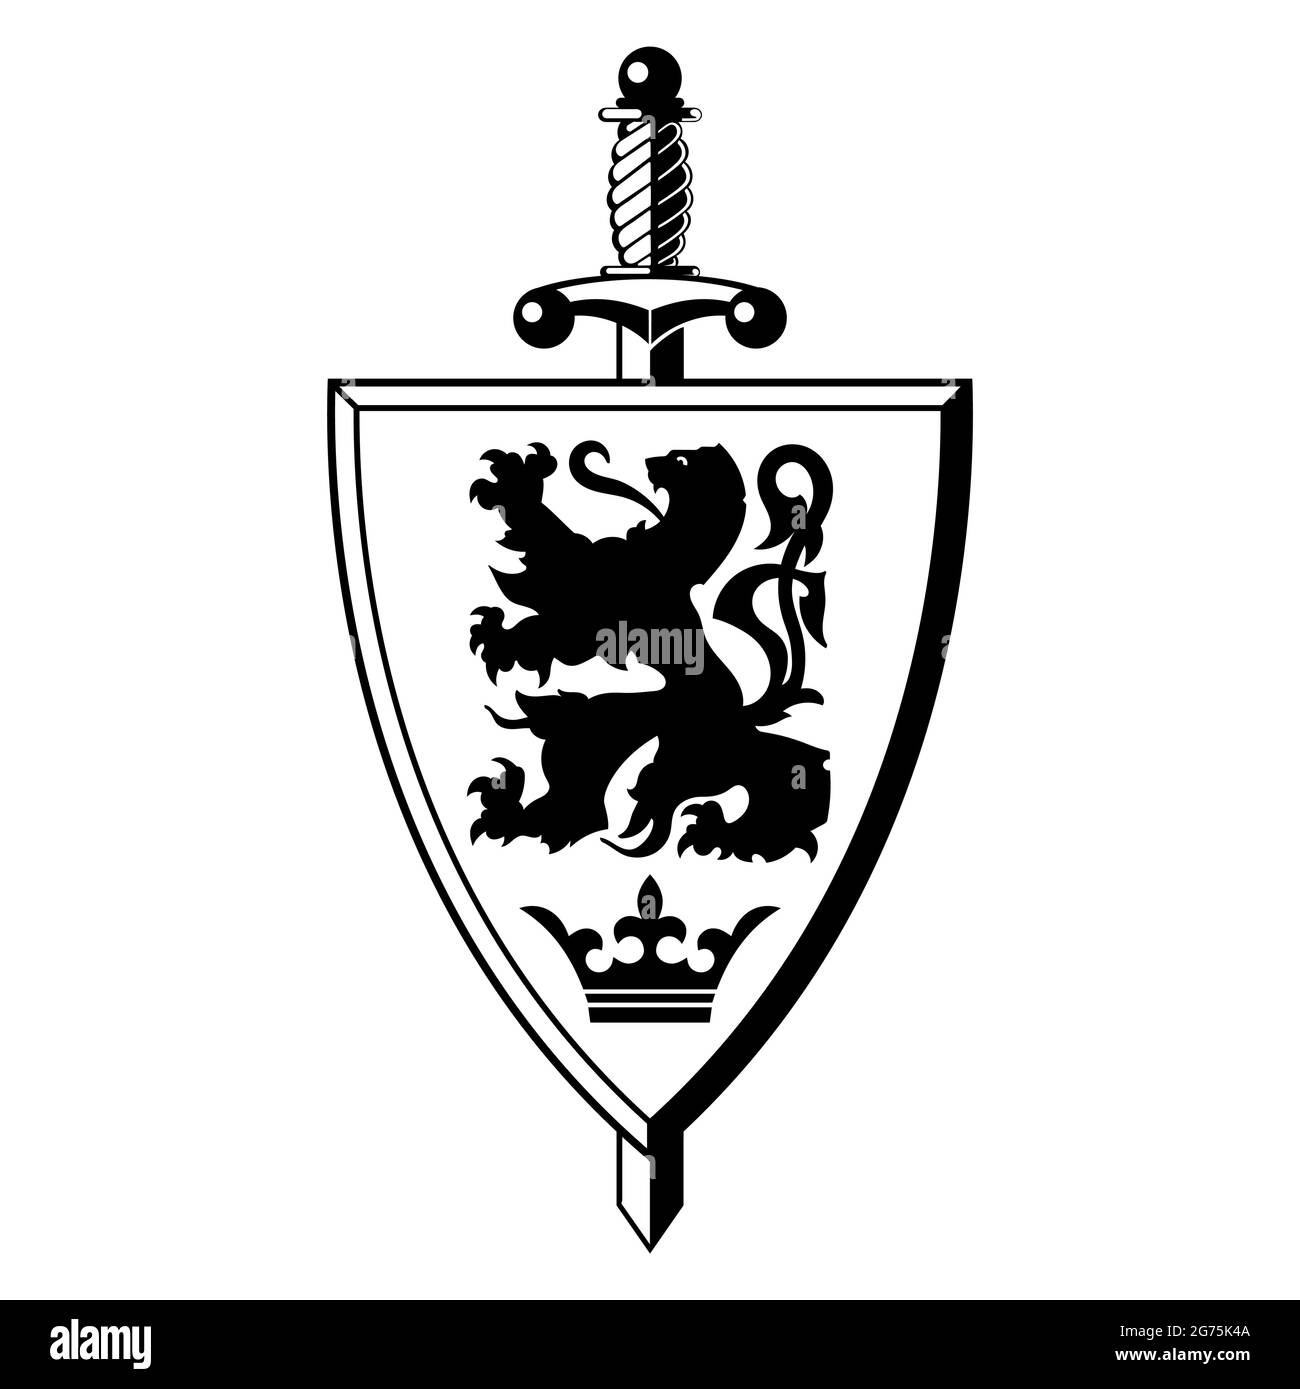 Knightly design. Shield With Heraldic Lion, Warrior Sword and Crown Stock Vector